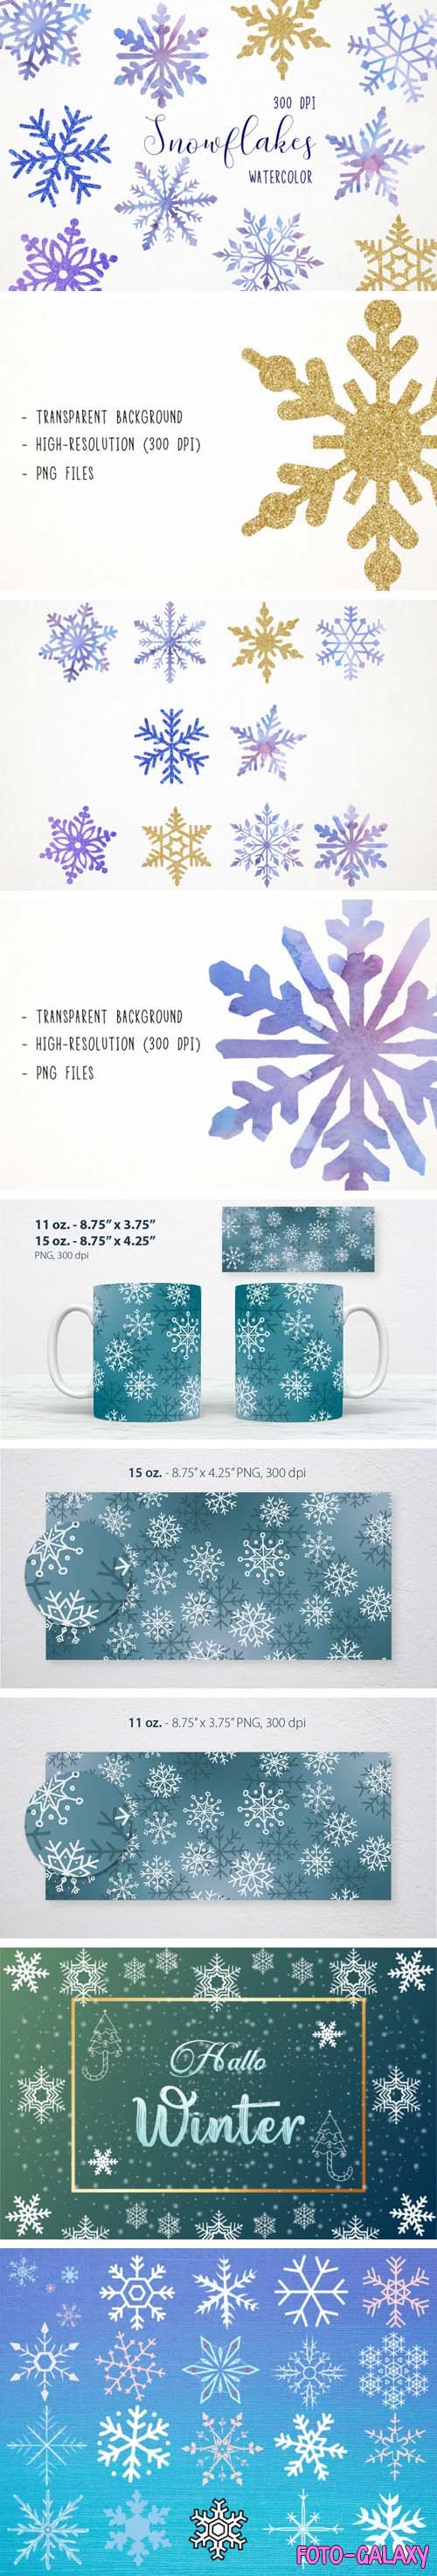 Snowflakes - Clipart Collection